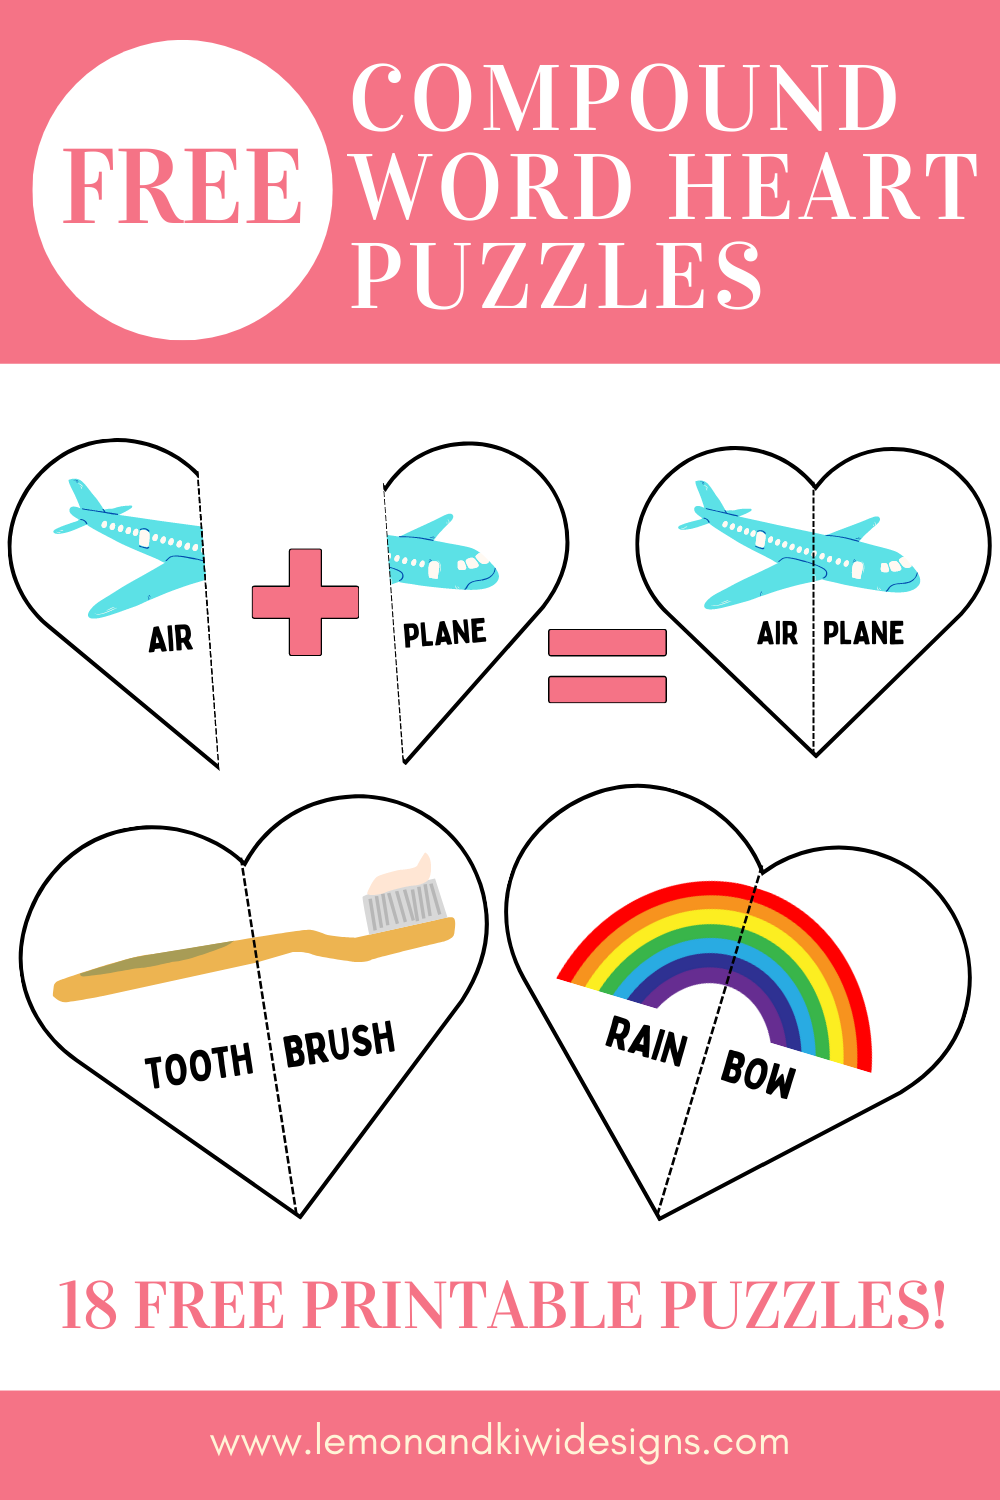 Free Printable Heart-Shaped Compound Word Puzzles